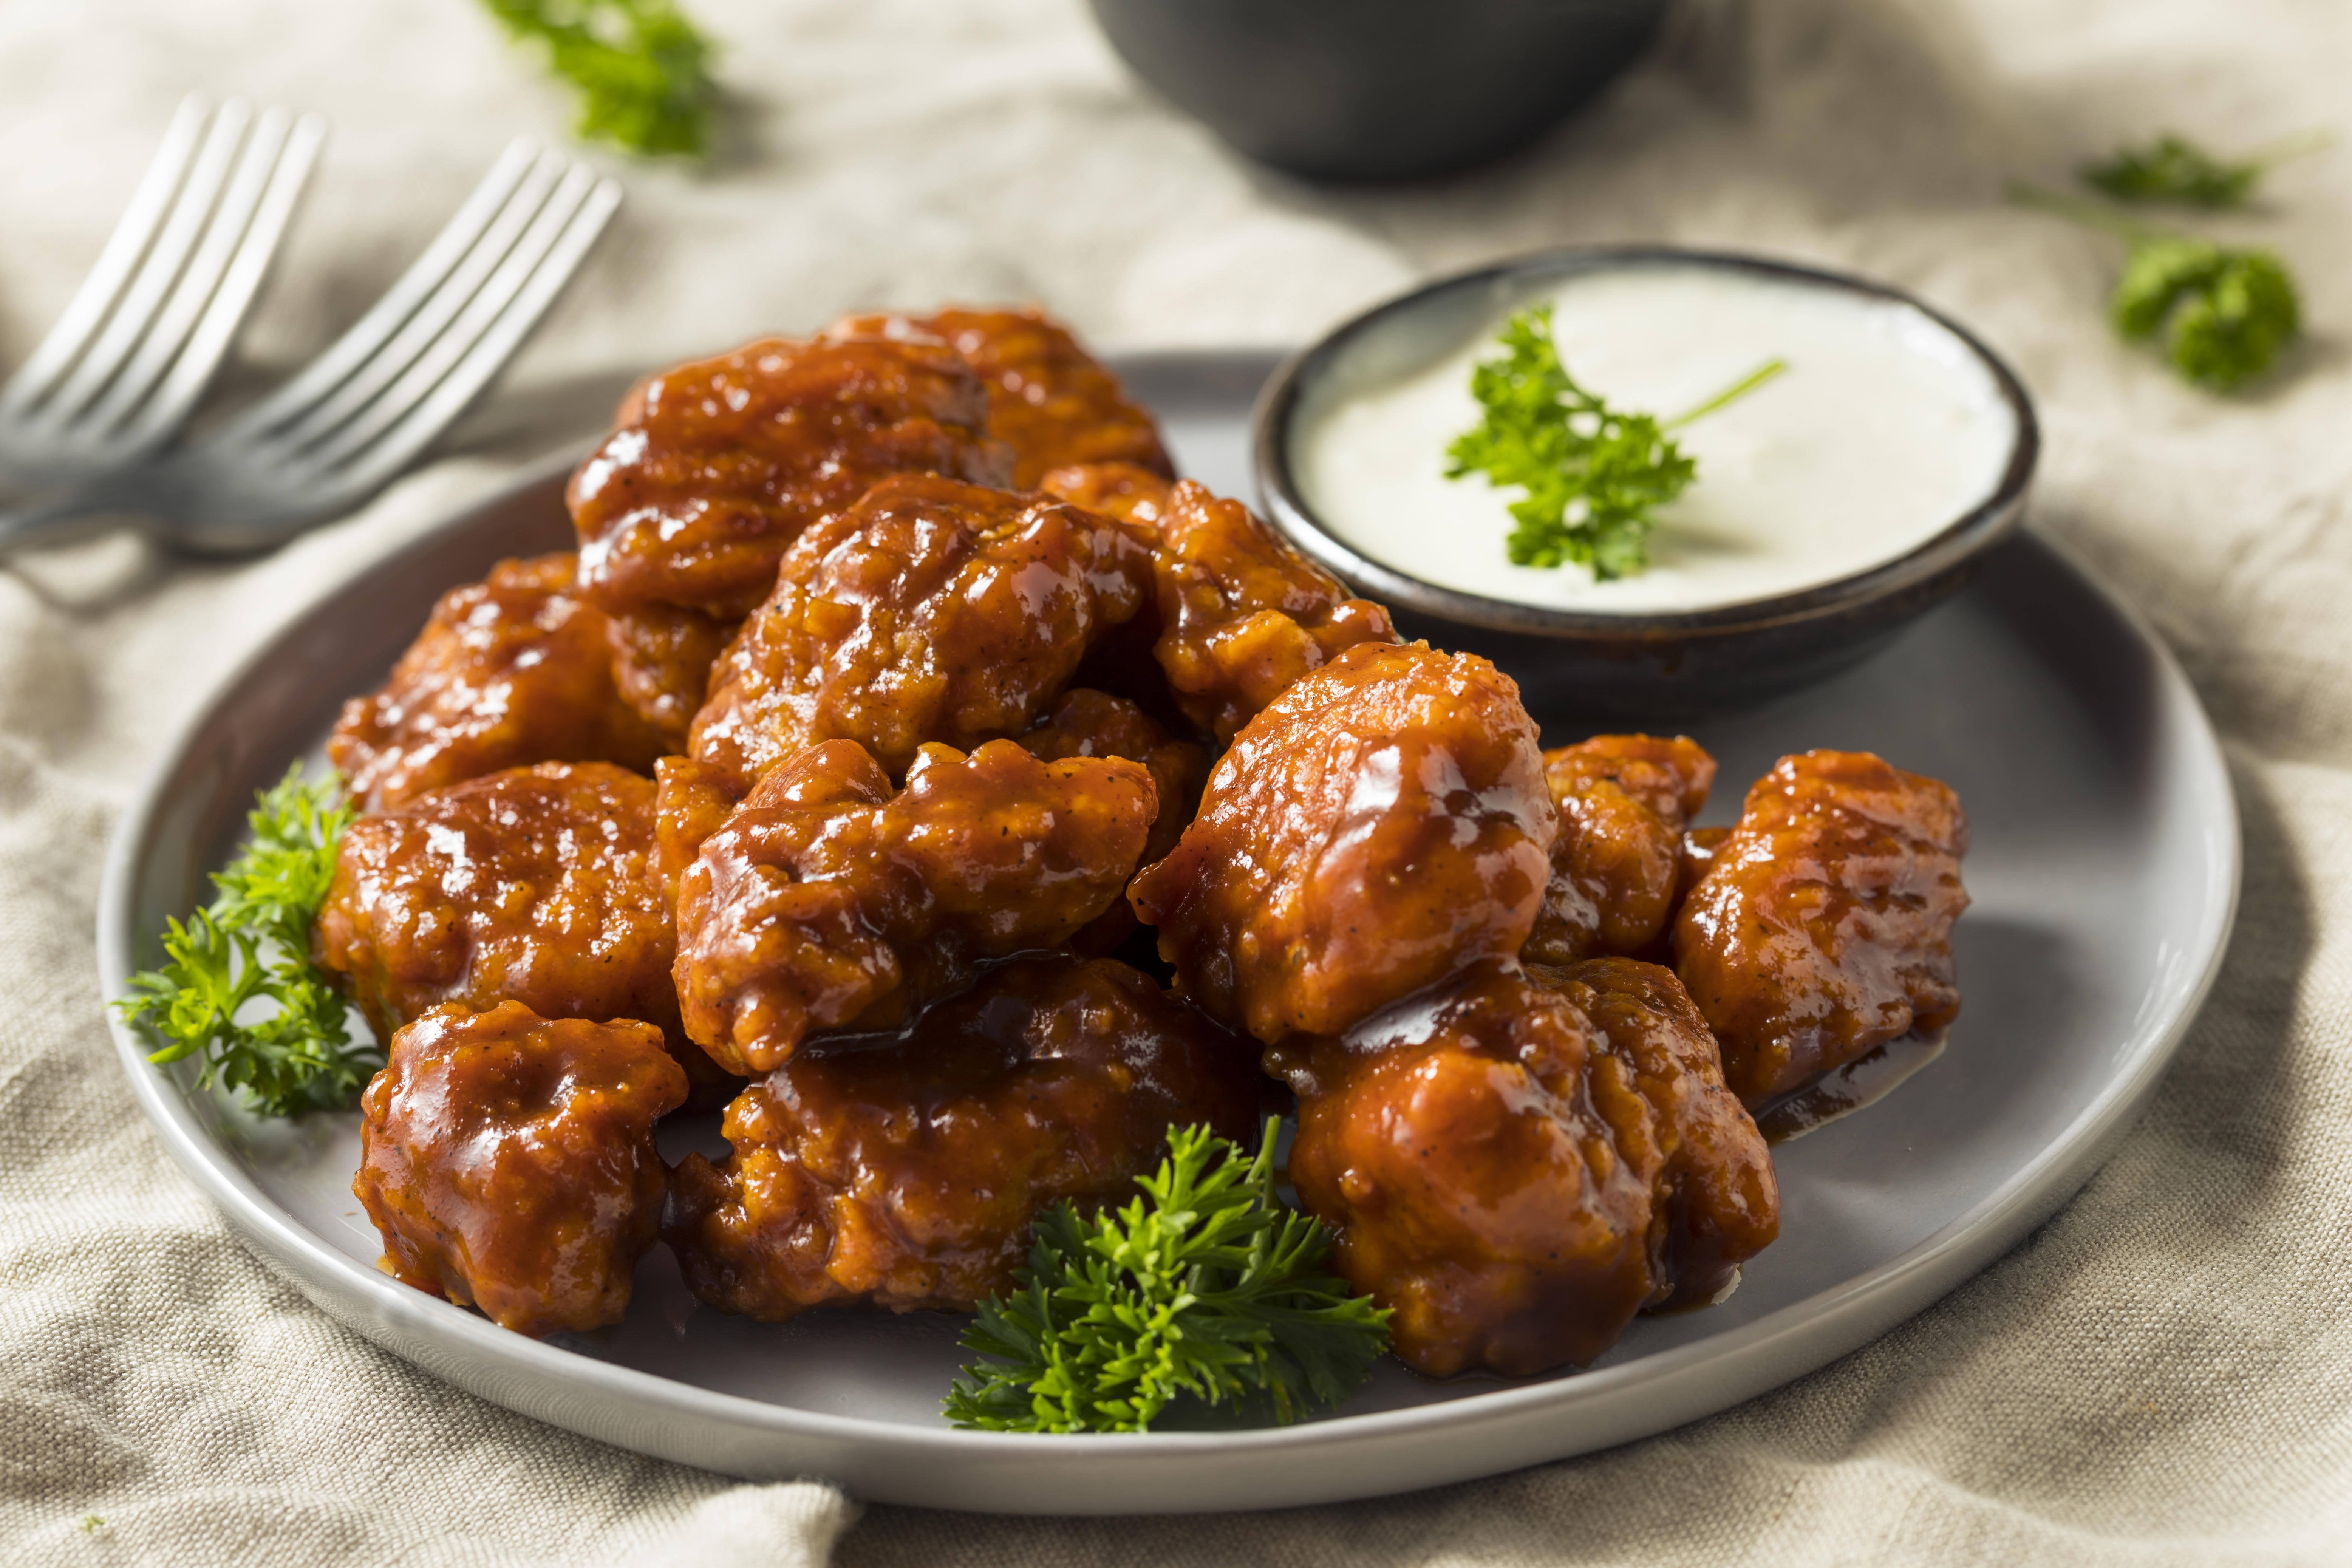 Boneless wings can have bones? Court rules against man who tore esophagus